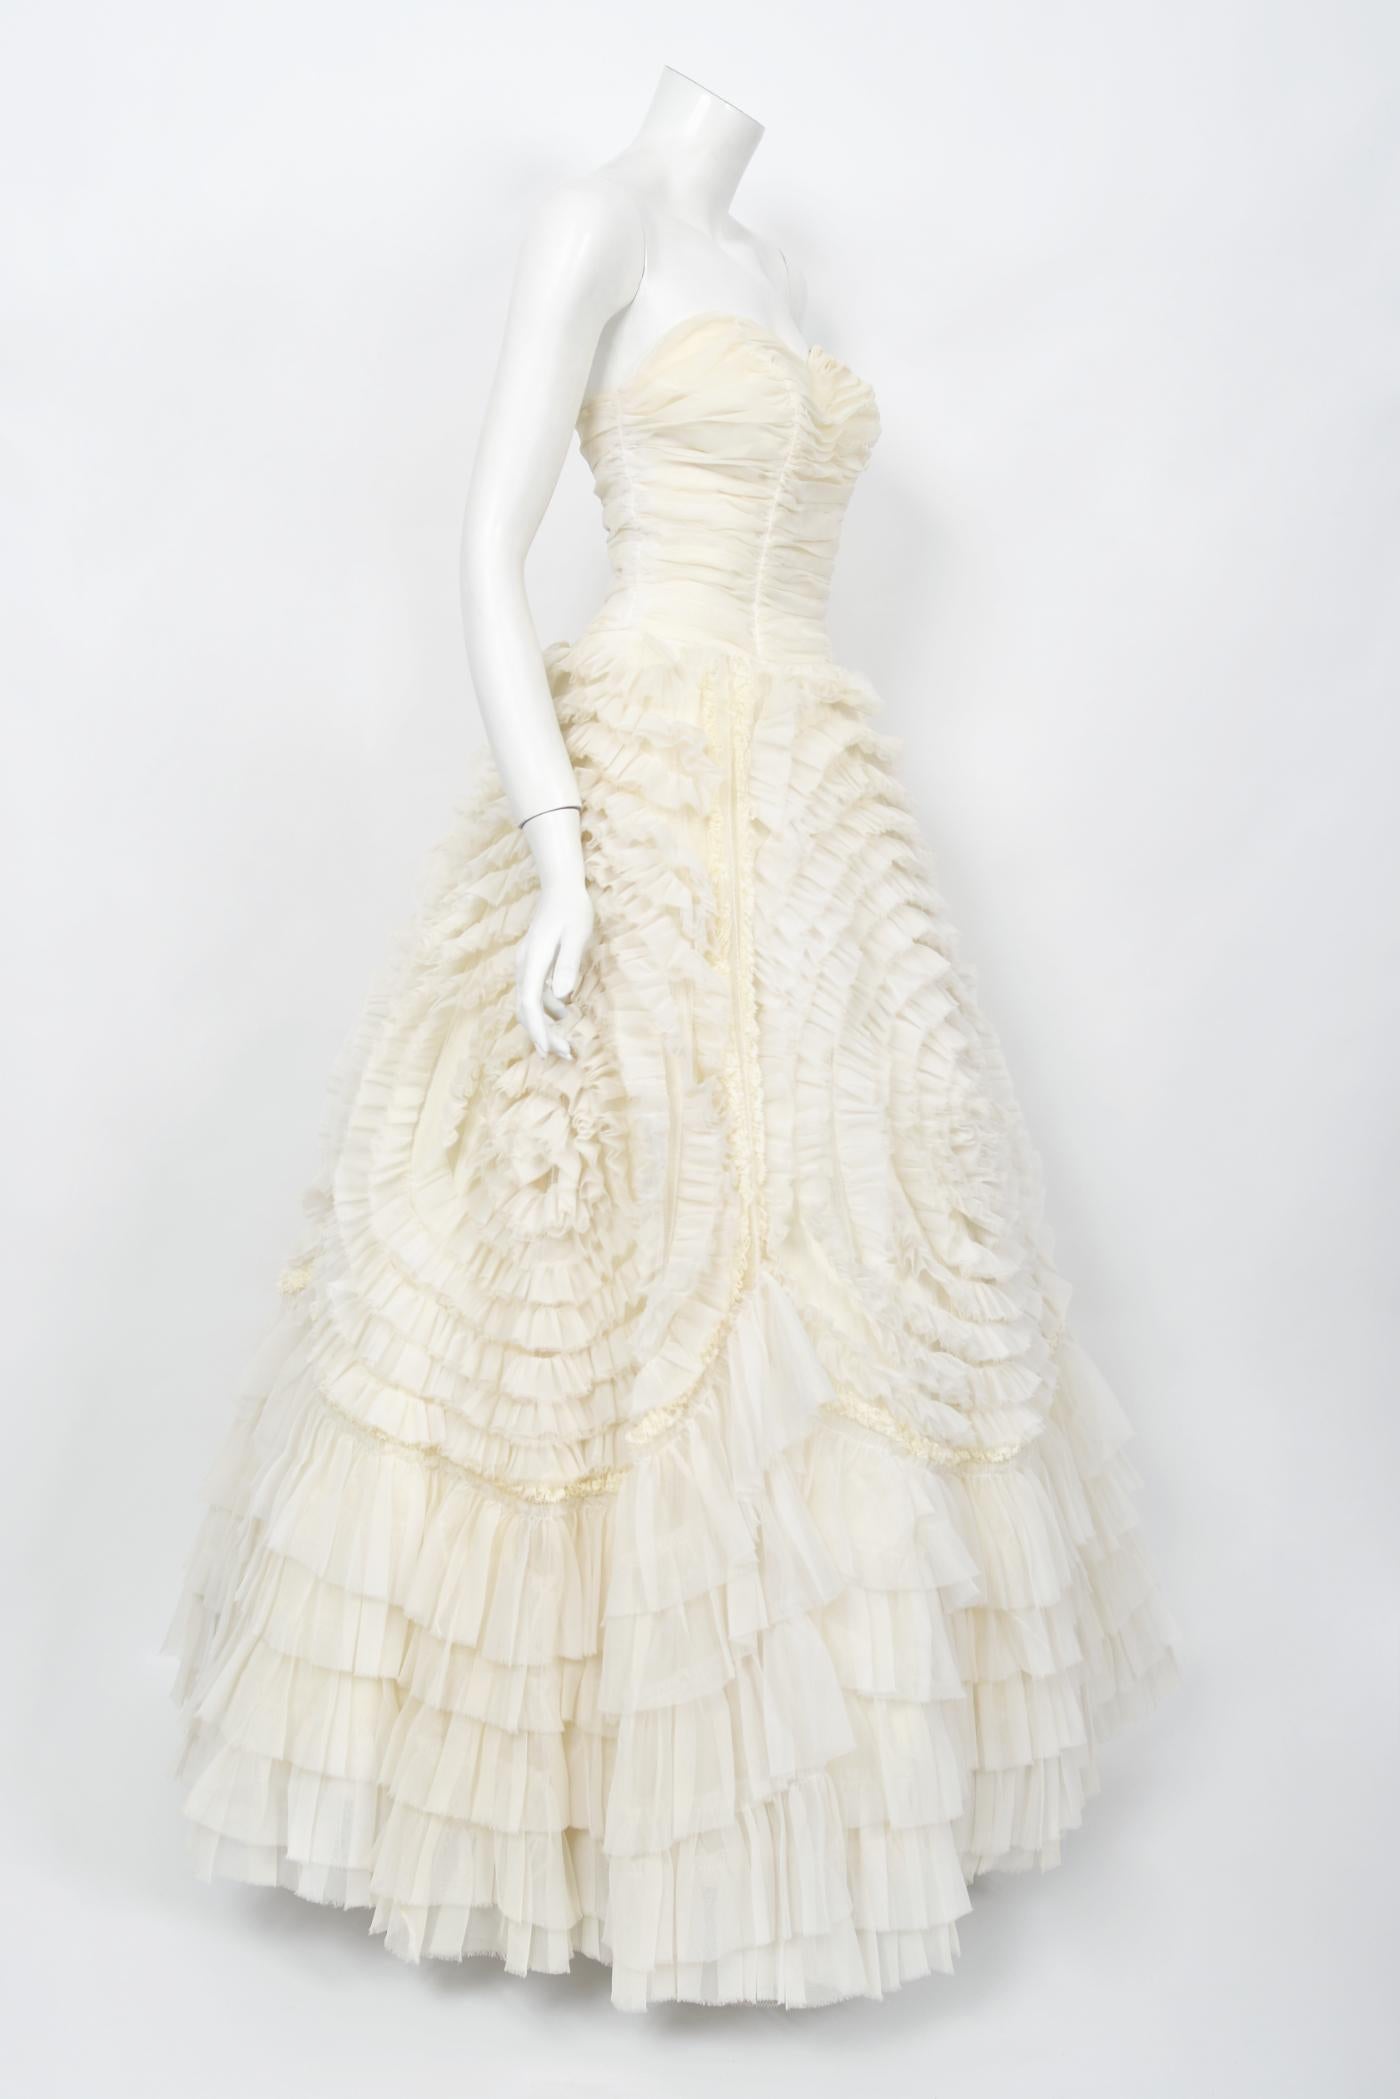 Vintage 1950's Ivory Chiffon Strapless Tiered Ruffle Full-Length Bridal Gown  4